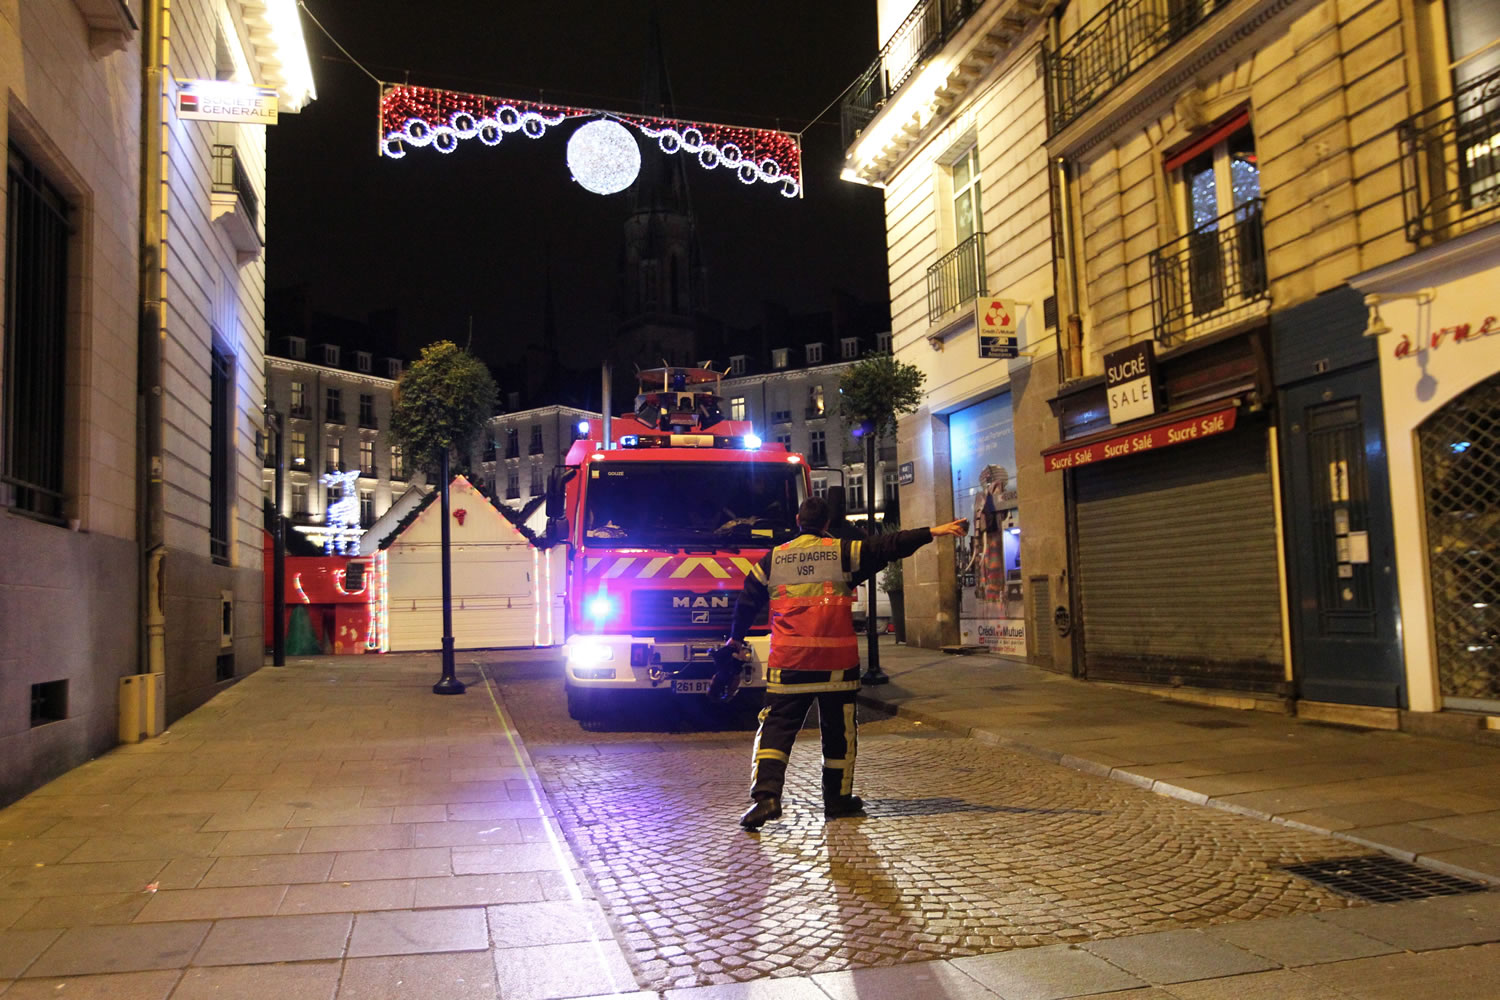 A rescue worker directs a fire brigade vehicle after a van crashed into a French Christmas market in Nantes, western France on Monday.